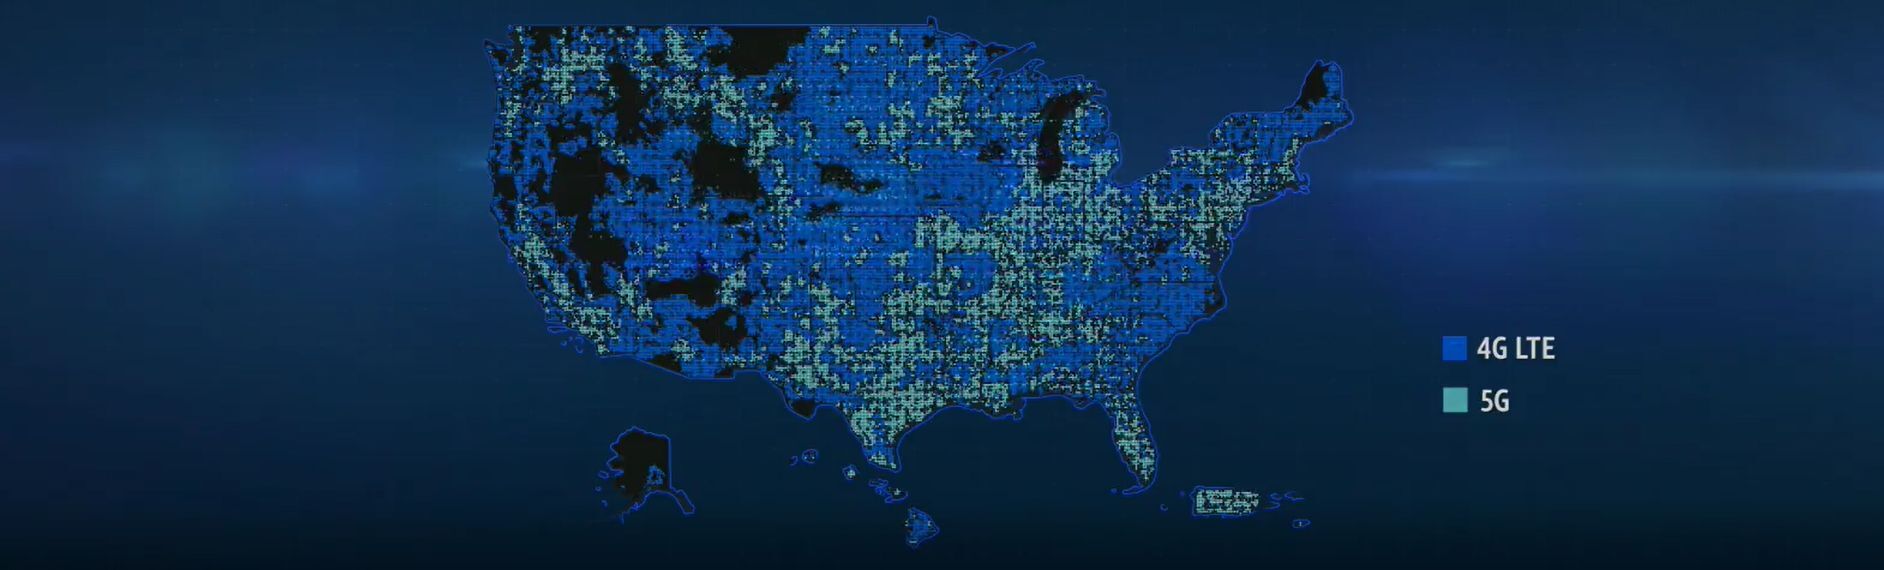 AT&amp;T coverage in early 2021 - AT&T 5G / 5G E network coverage map: which cities are covered?